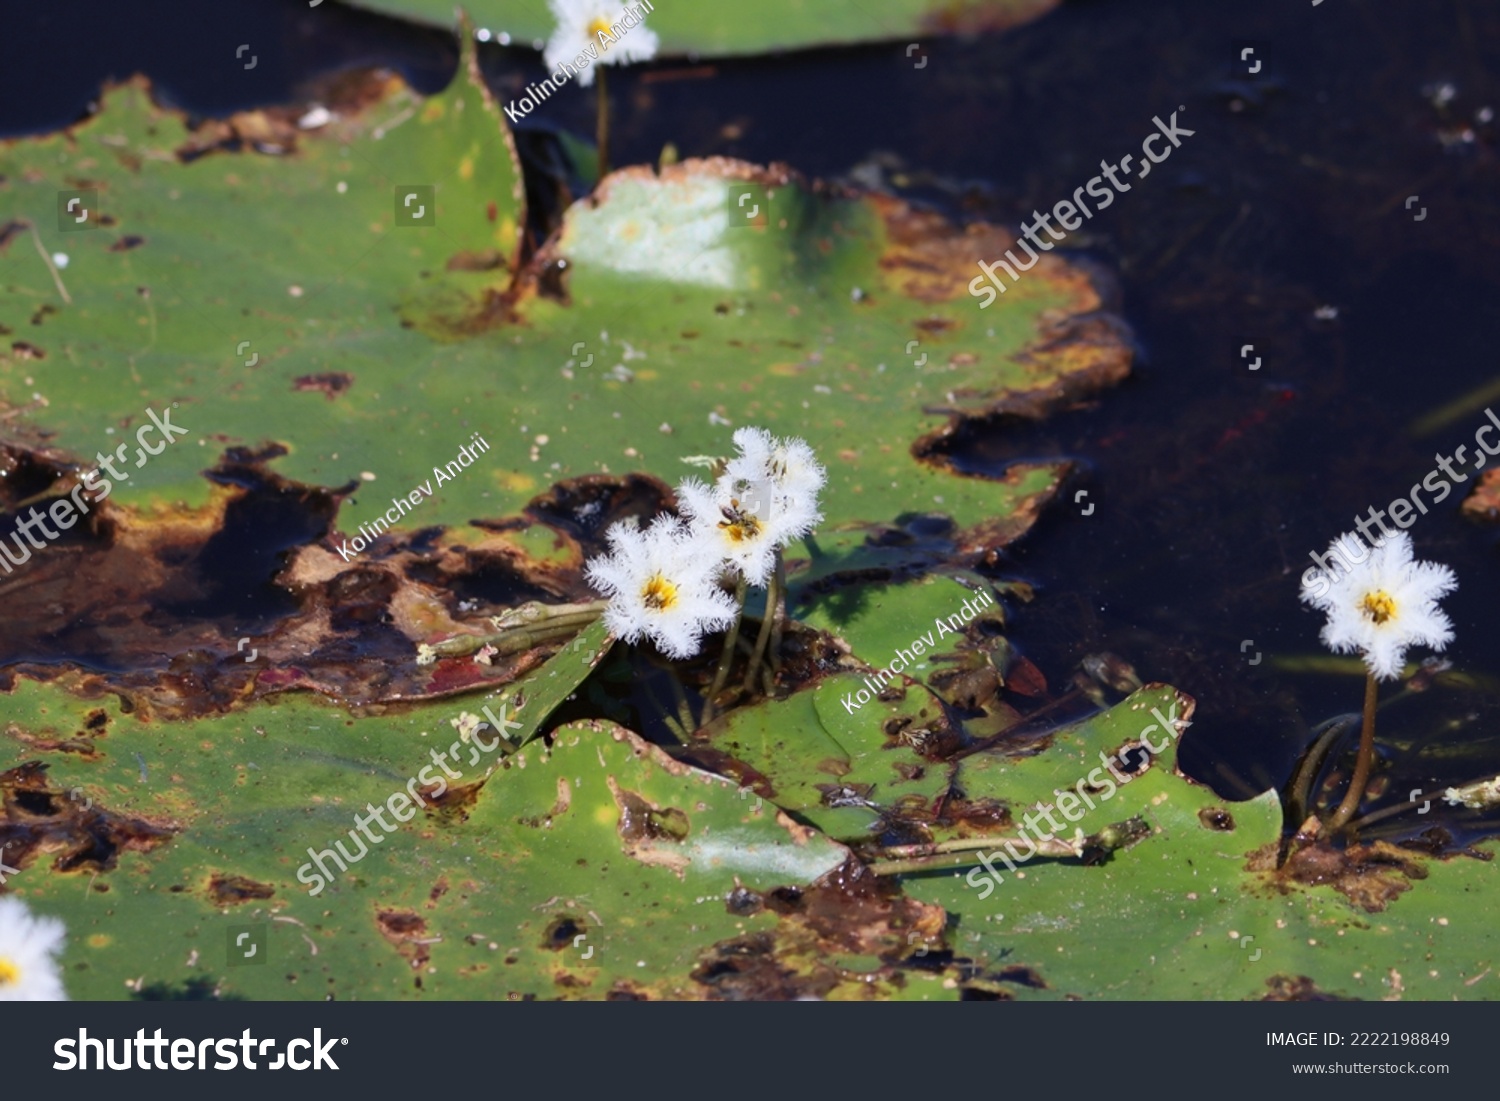 Cambodia. Nymphoides indica is an aquatic plant in the Menyanthaceae. Common names include banana plant, robust marshwort, and water snowflake. #2222198849